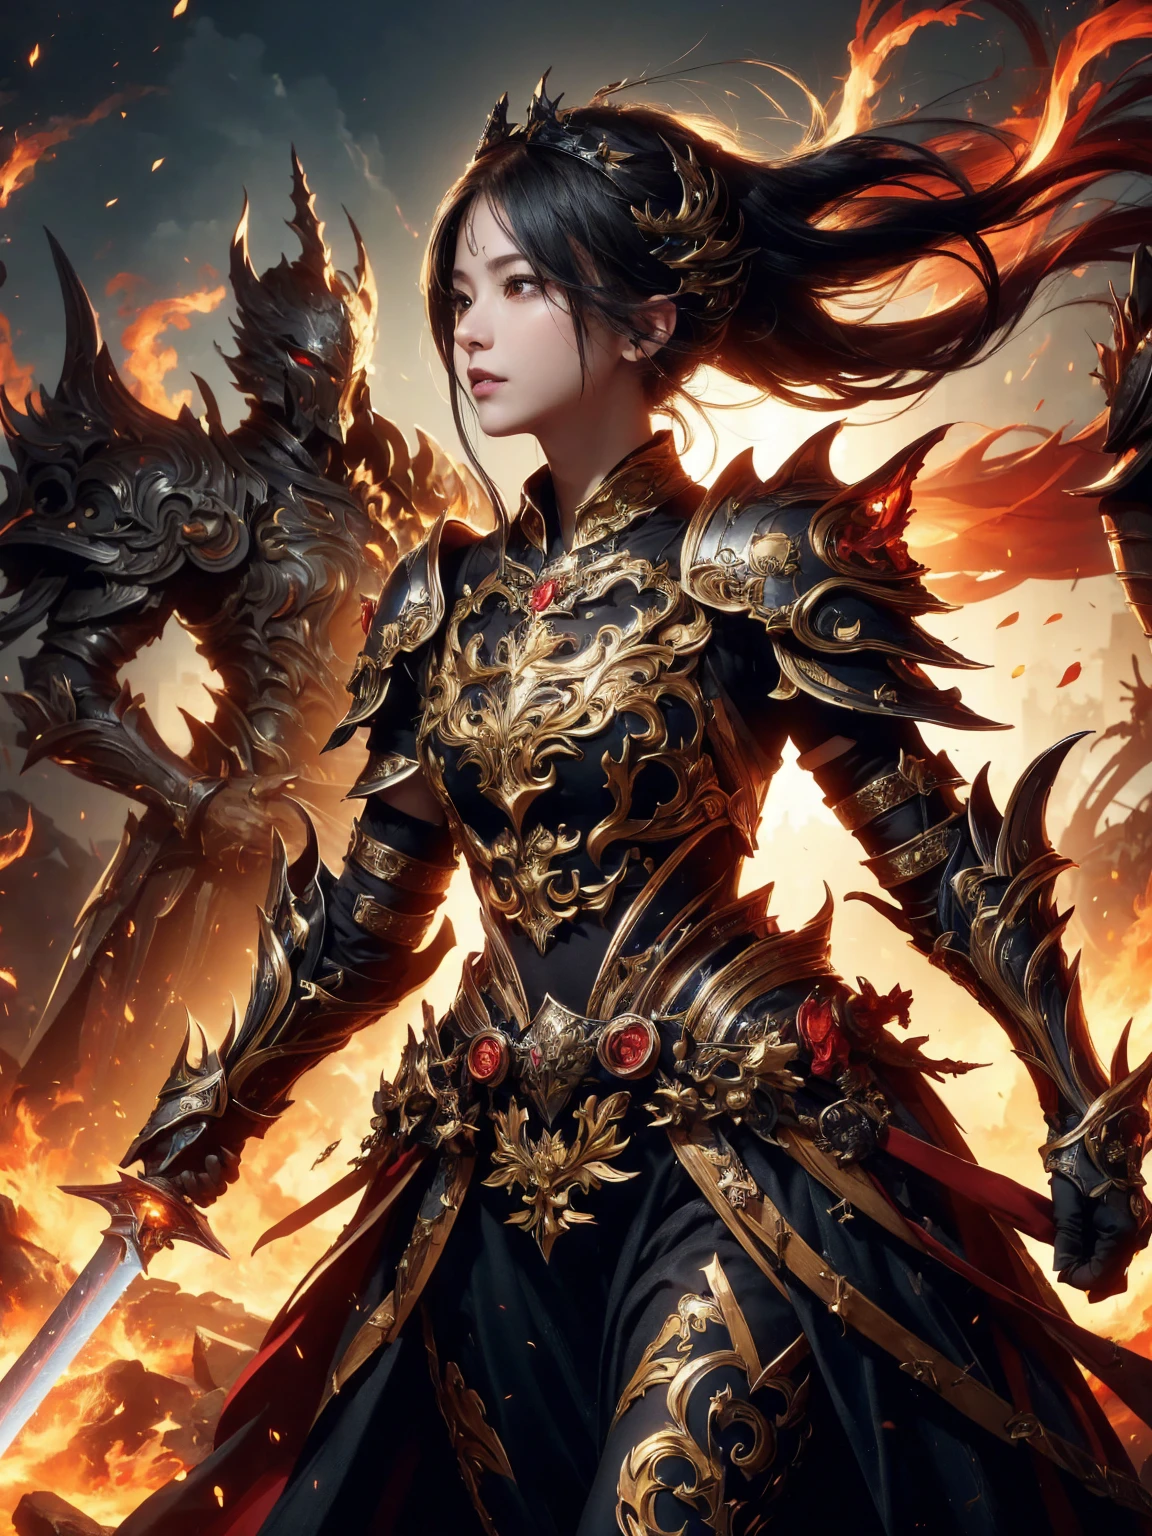 ((Low angle view)), ((Detailed background)), ((Battlefield, group of armies)), (masterpiece, top quality, best quality, official art, beautiful and aesthetic:1.2), (1girl),craft a Hyper-realistic portrayal of a futuristic (1girl1.2), beautiful character donned in intricate armor surrounded by captivating flames, an epic long (sword:1.2), Dynamic pose, Random pose, Dynamic angle, battle stance, Meticulous details capture the intense fusion of tradition and innovation in this visually stunning composition. Trending on Artstation. Perfect lighting,,